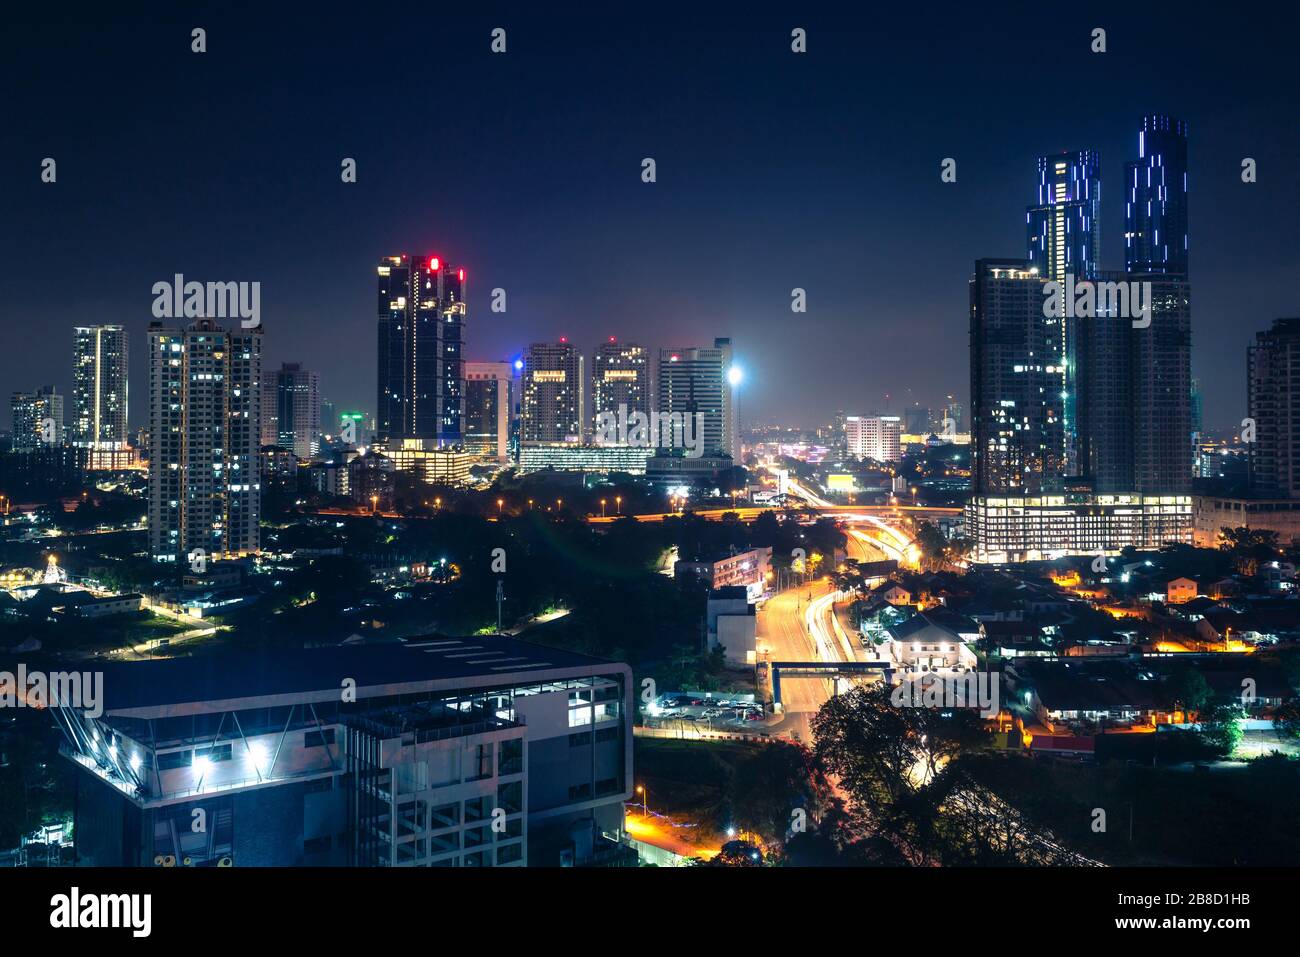 Johor Bahru, Malaysia, at night. Malaysian city with traffic on highway and modern business buildings and hotels in downtown. Scenic urban skyline. Stock Photo